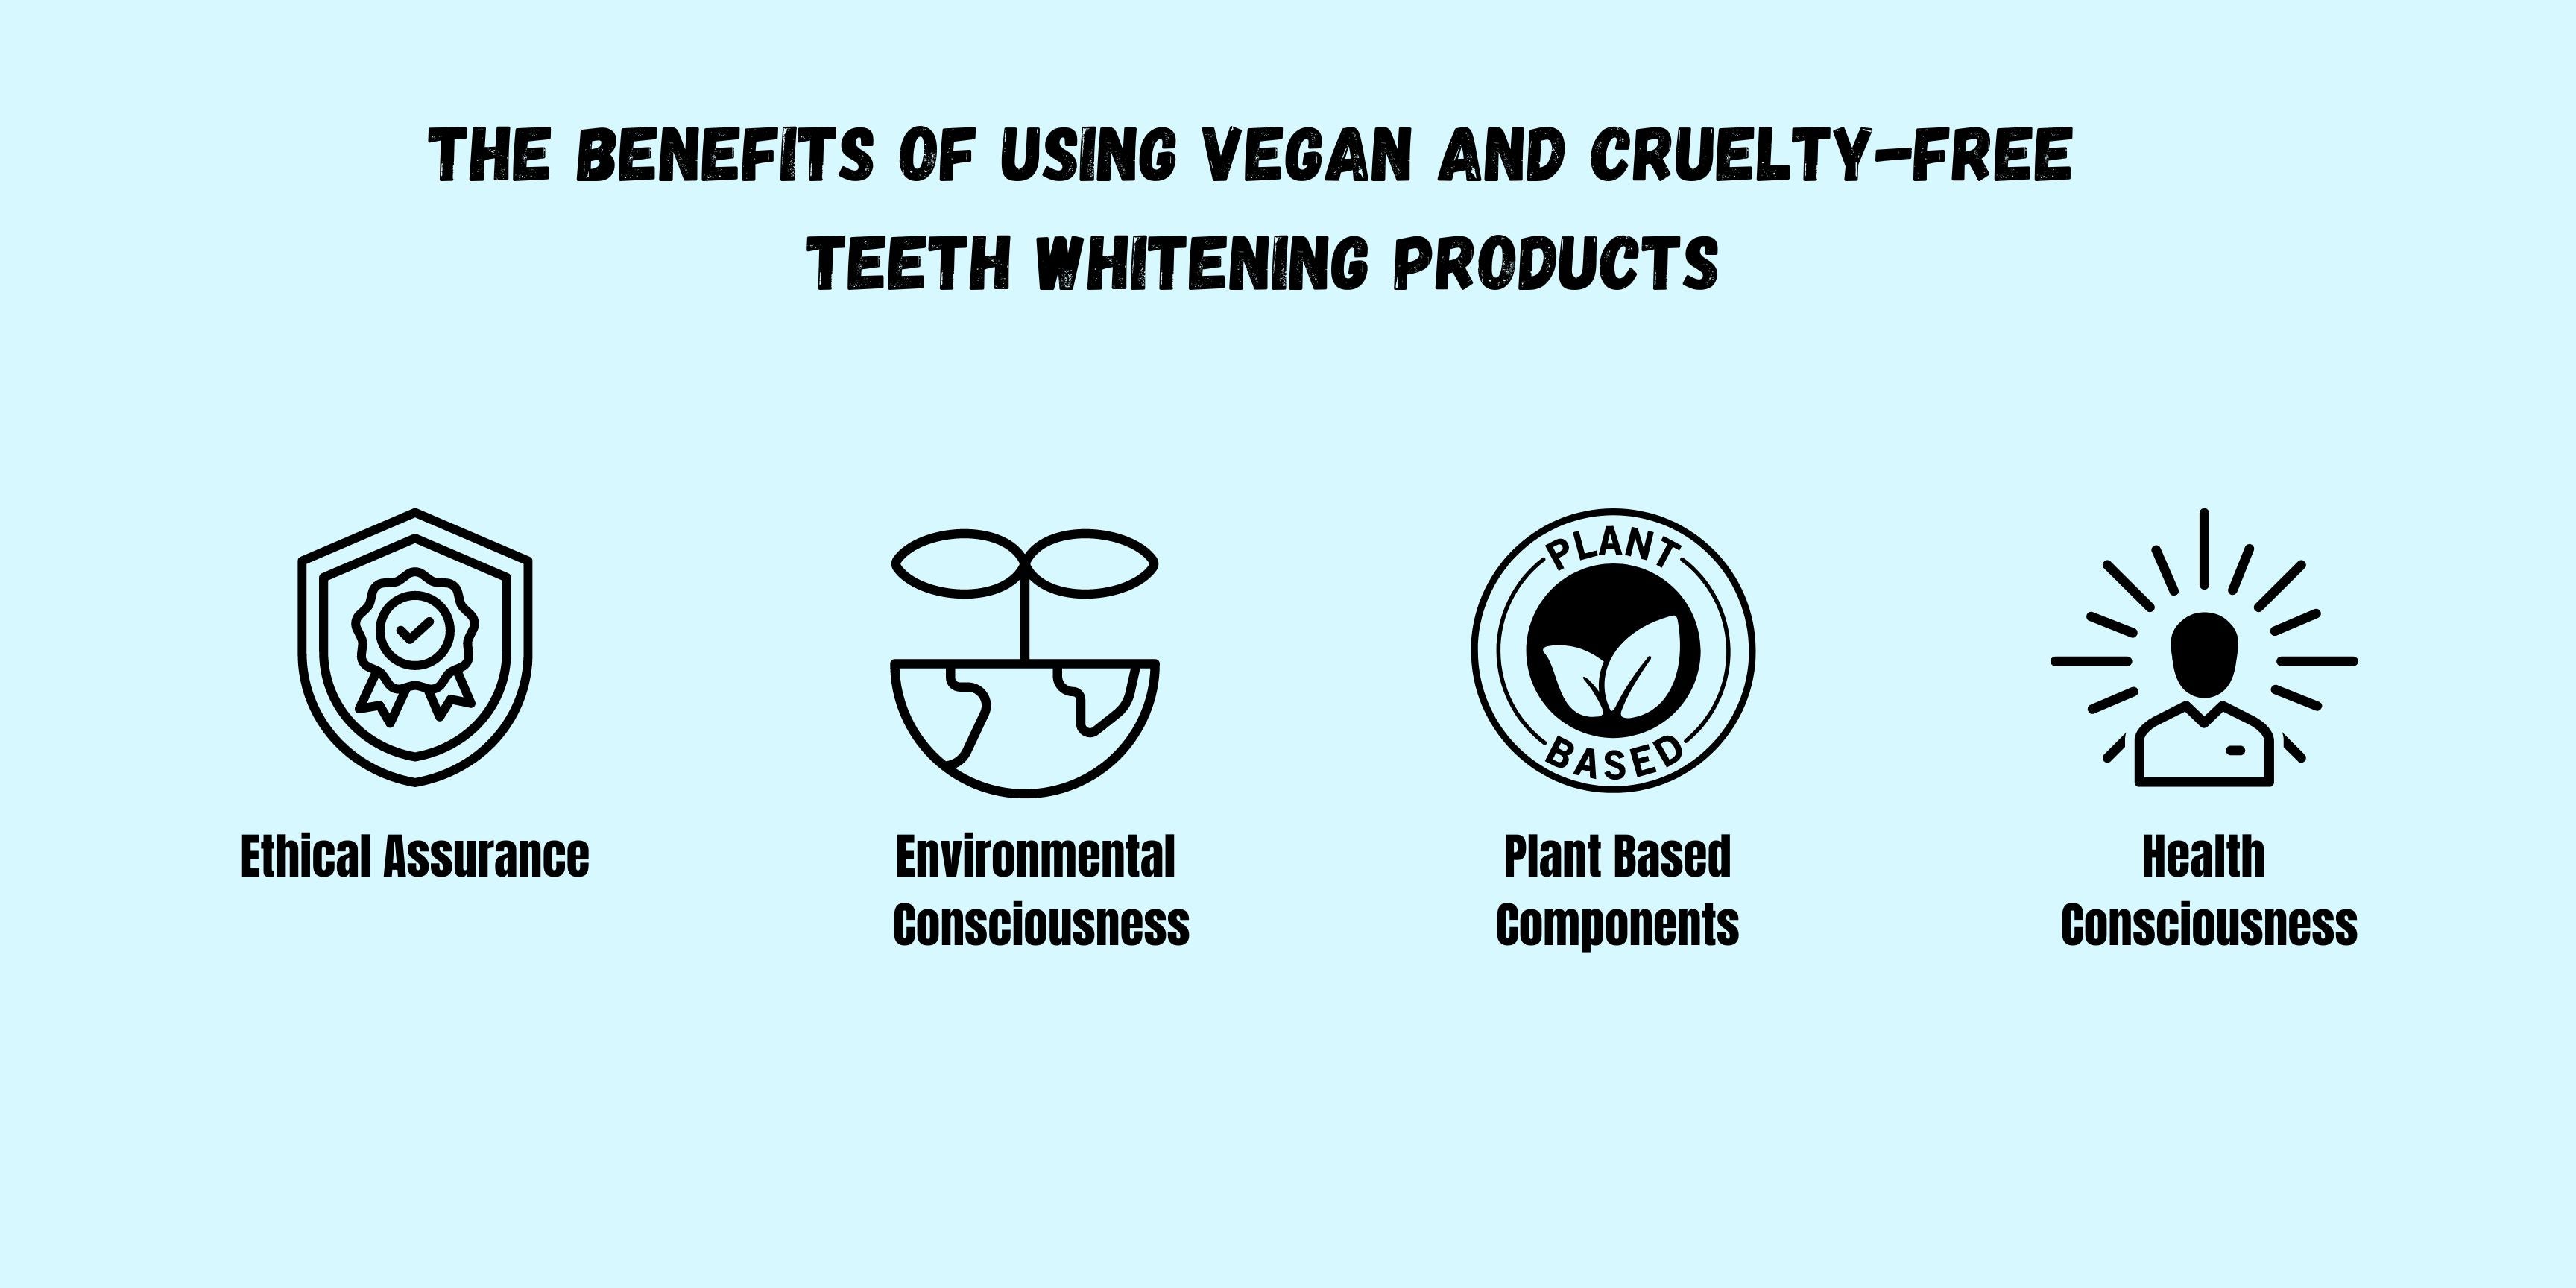 Benefits of Using Vegan and Cruelty-Free Teeth Whitening Products